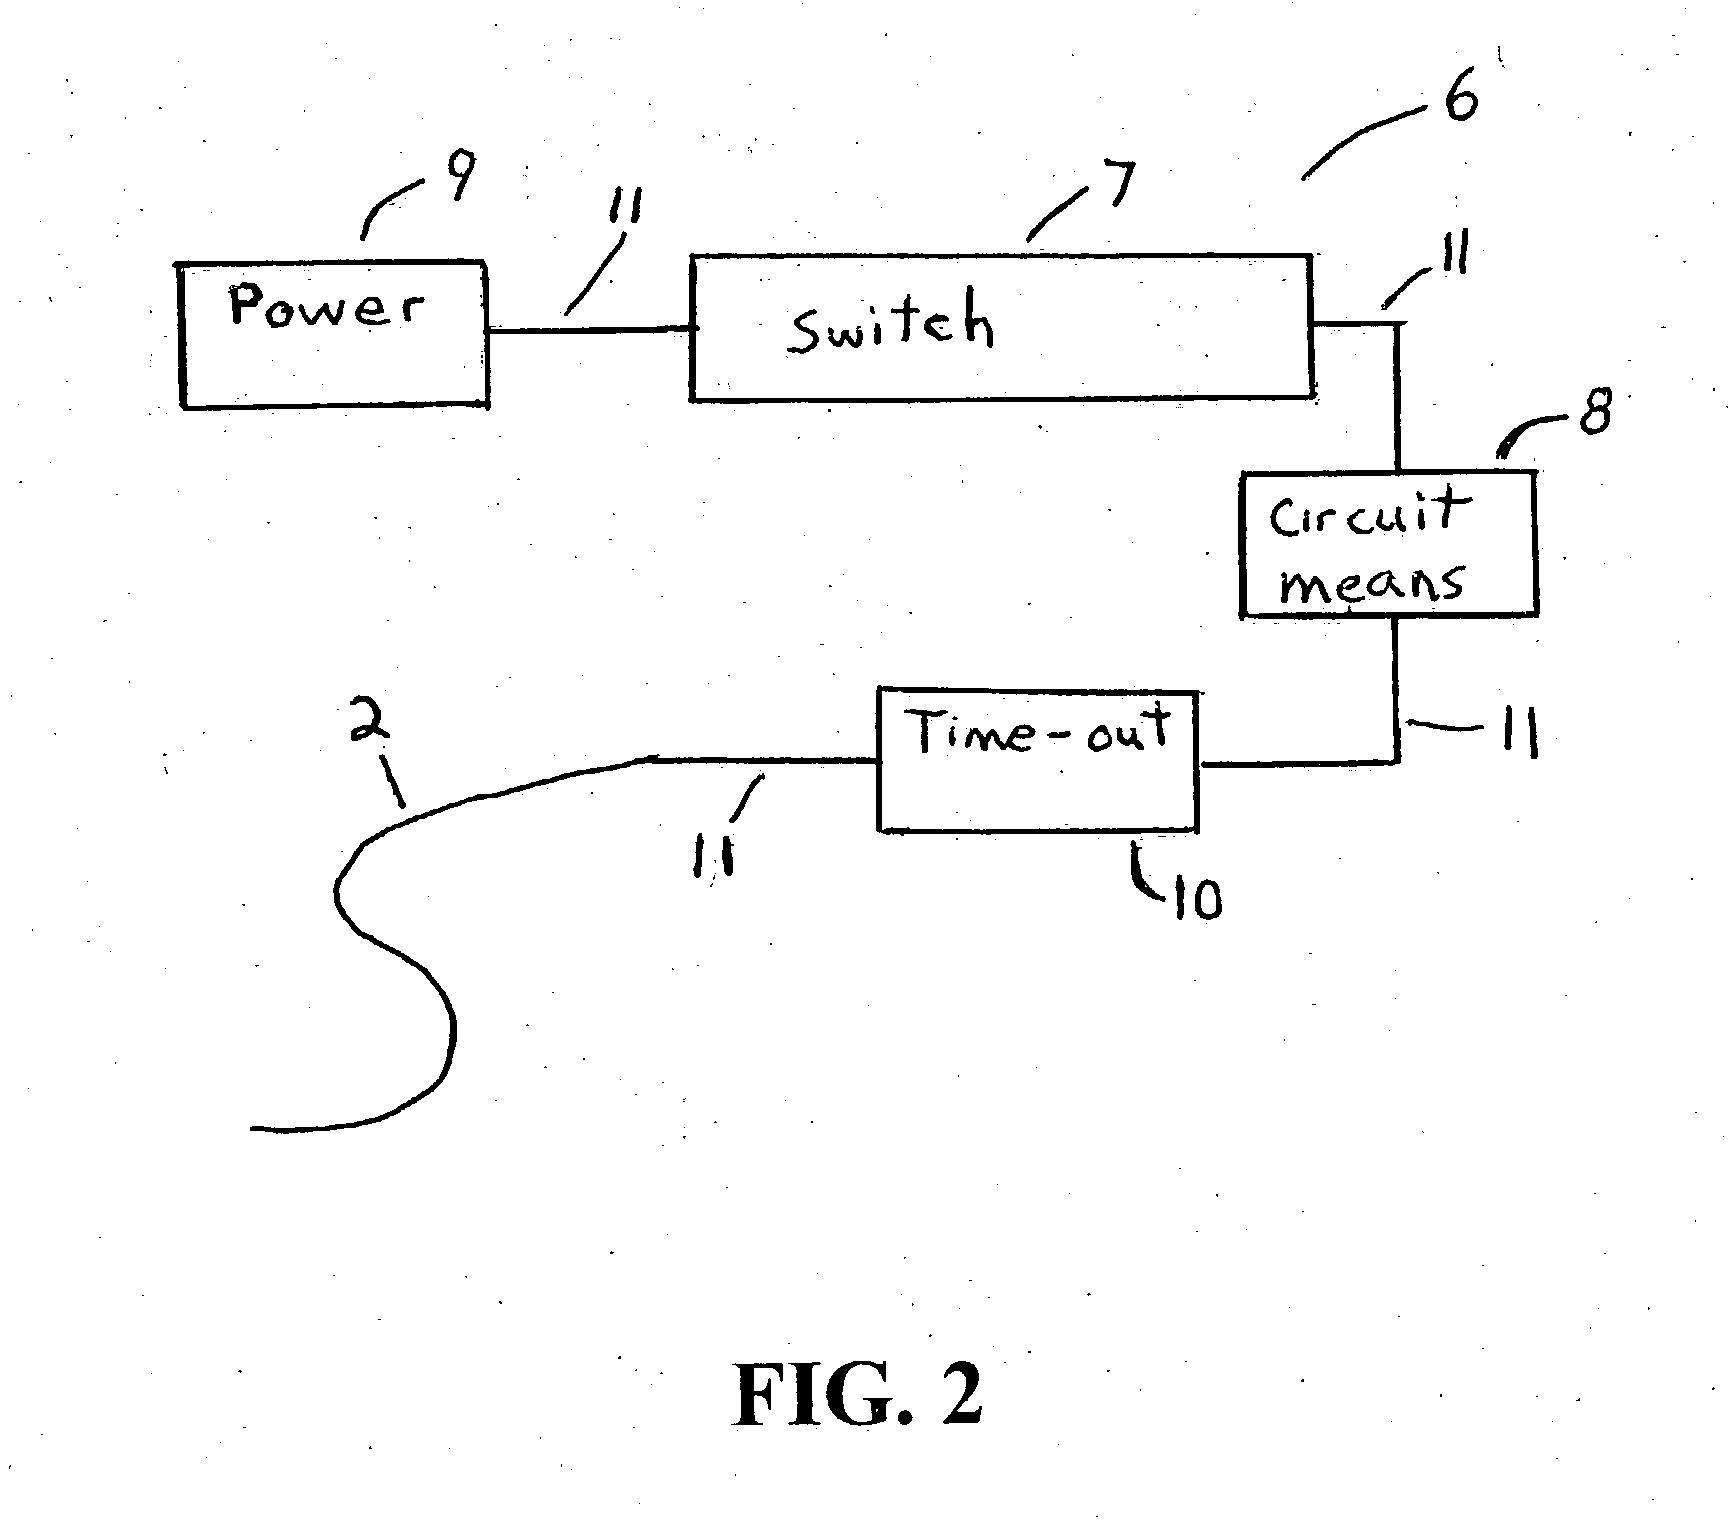 Apparatus and method for lighting wearable items